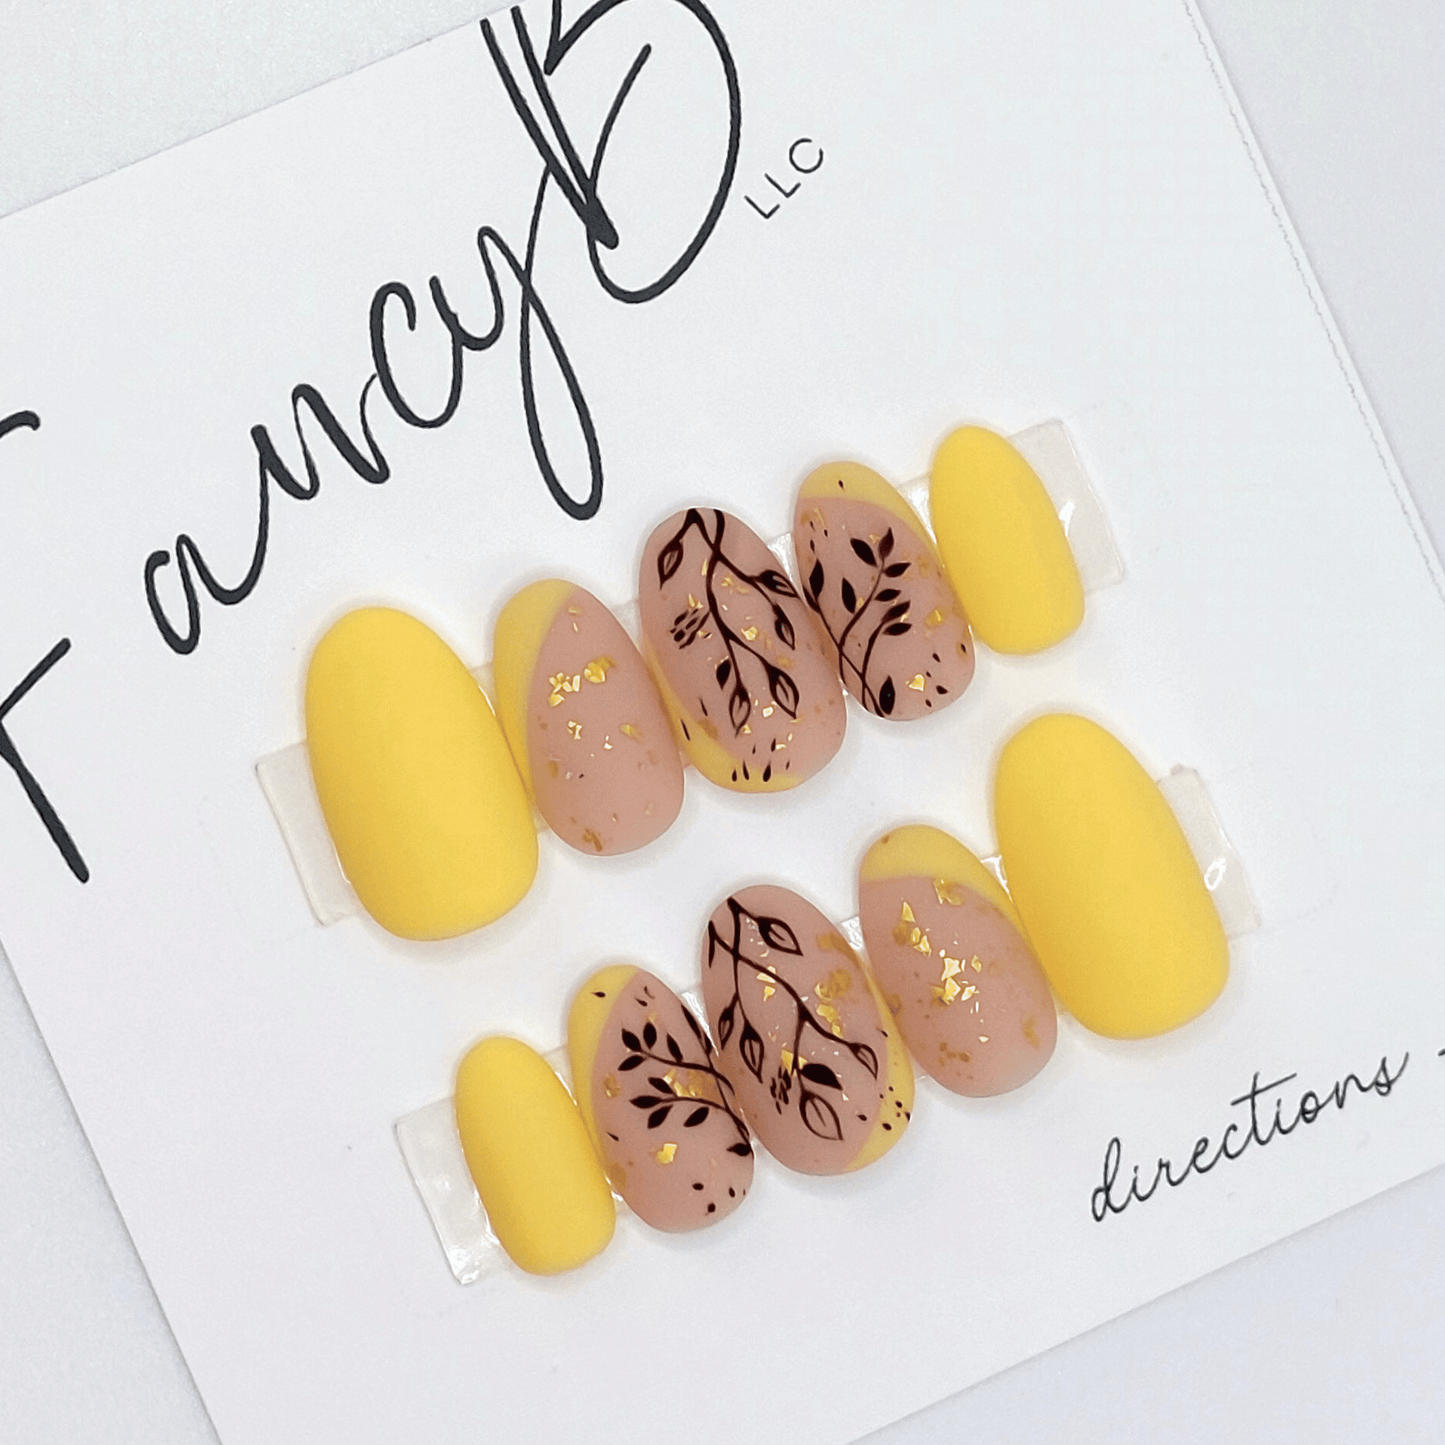 Custom press on nails with light yellow french tips, black floral designs, gold flakes, and a nude base with matte finish and short oval shape. Custom nails from FancyB.